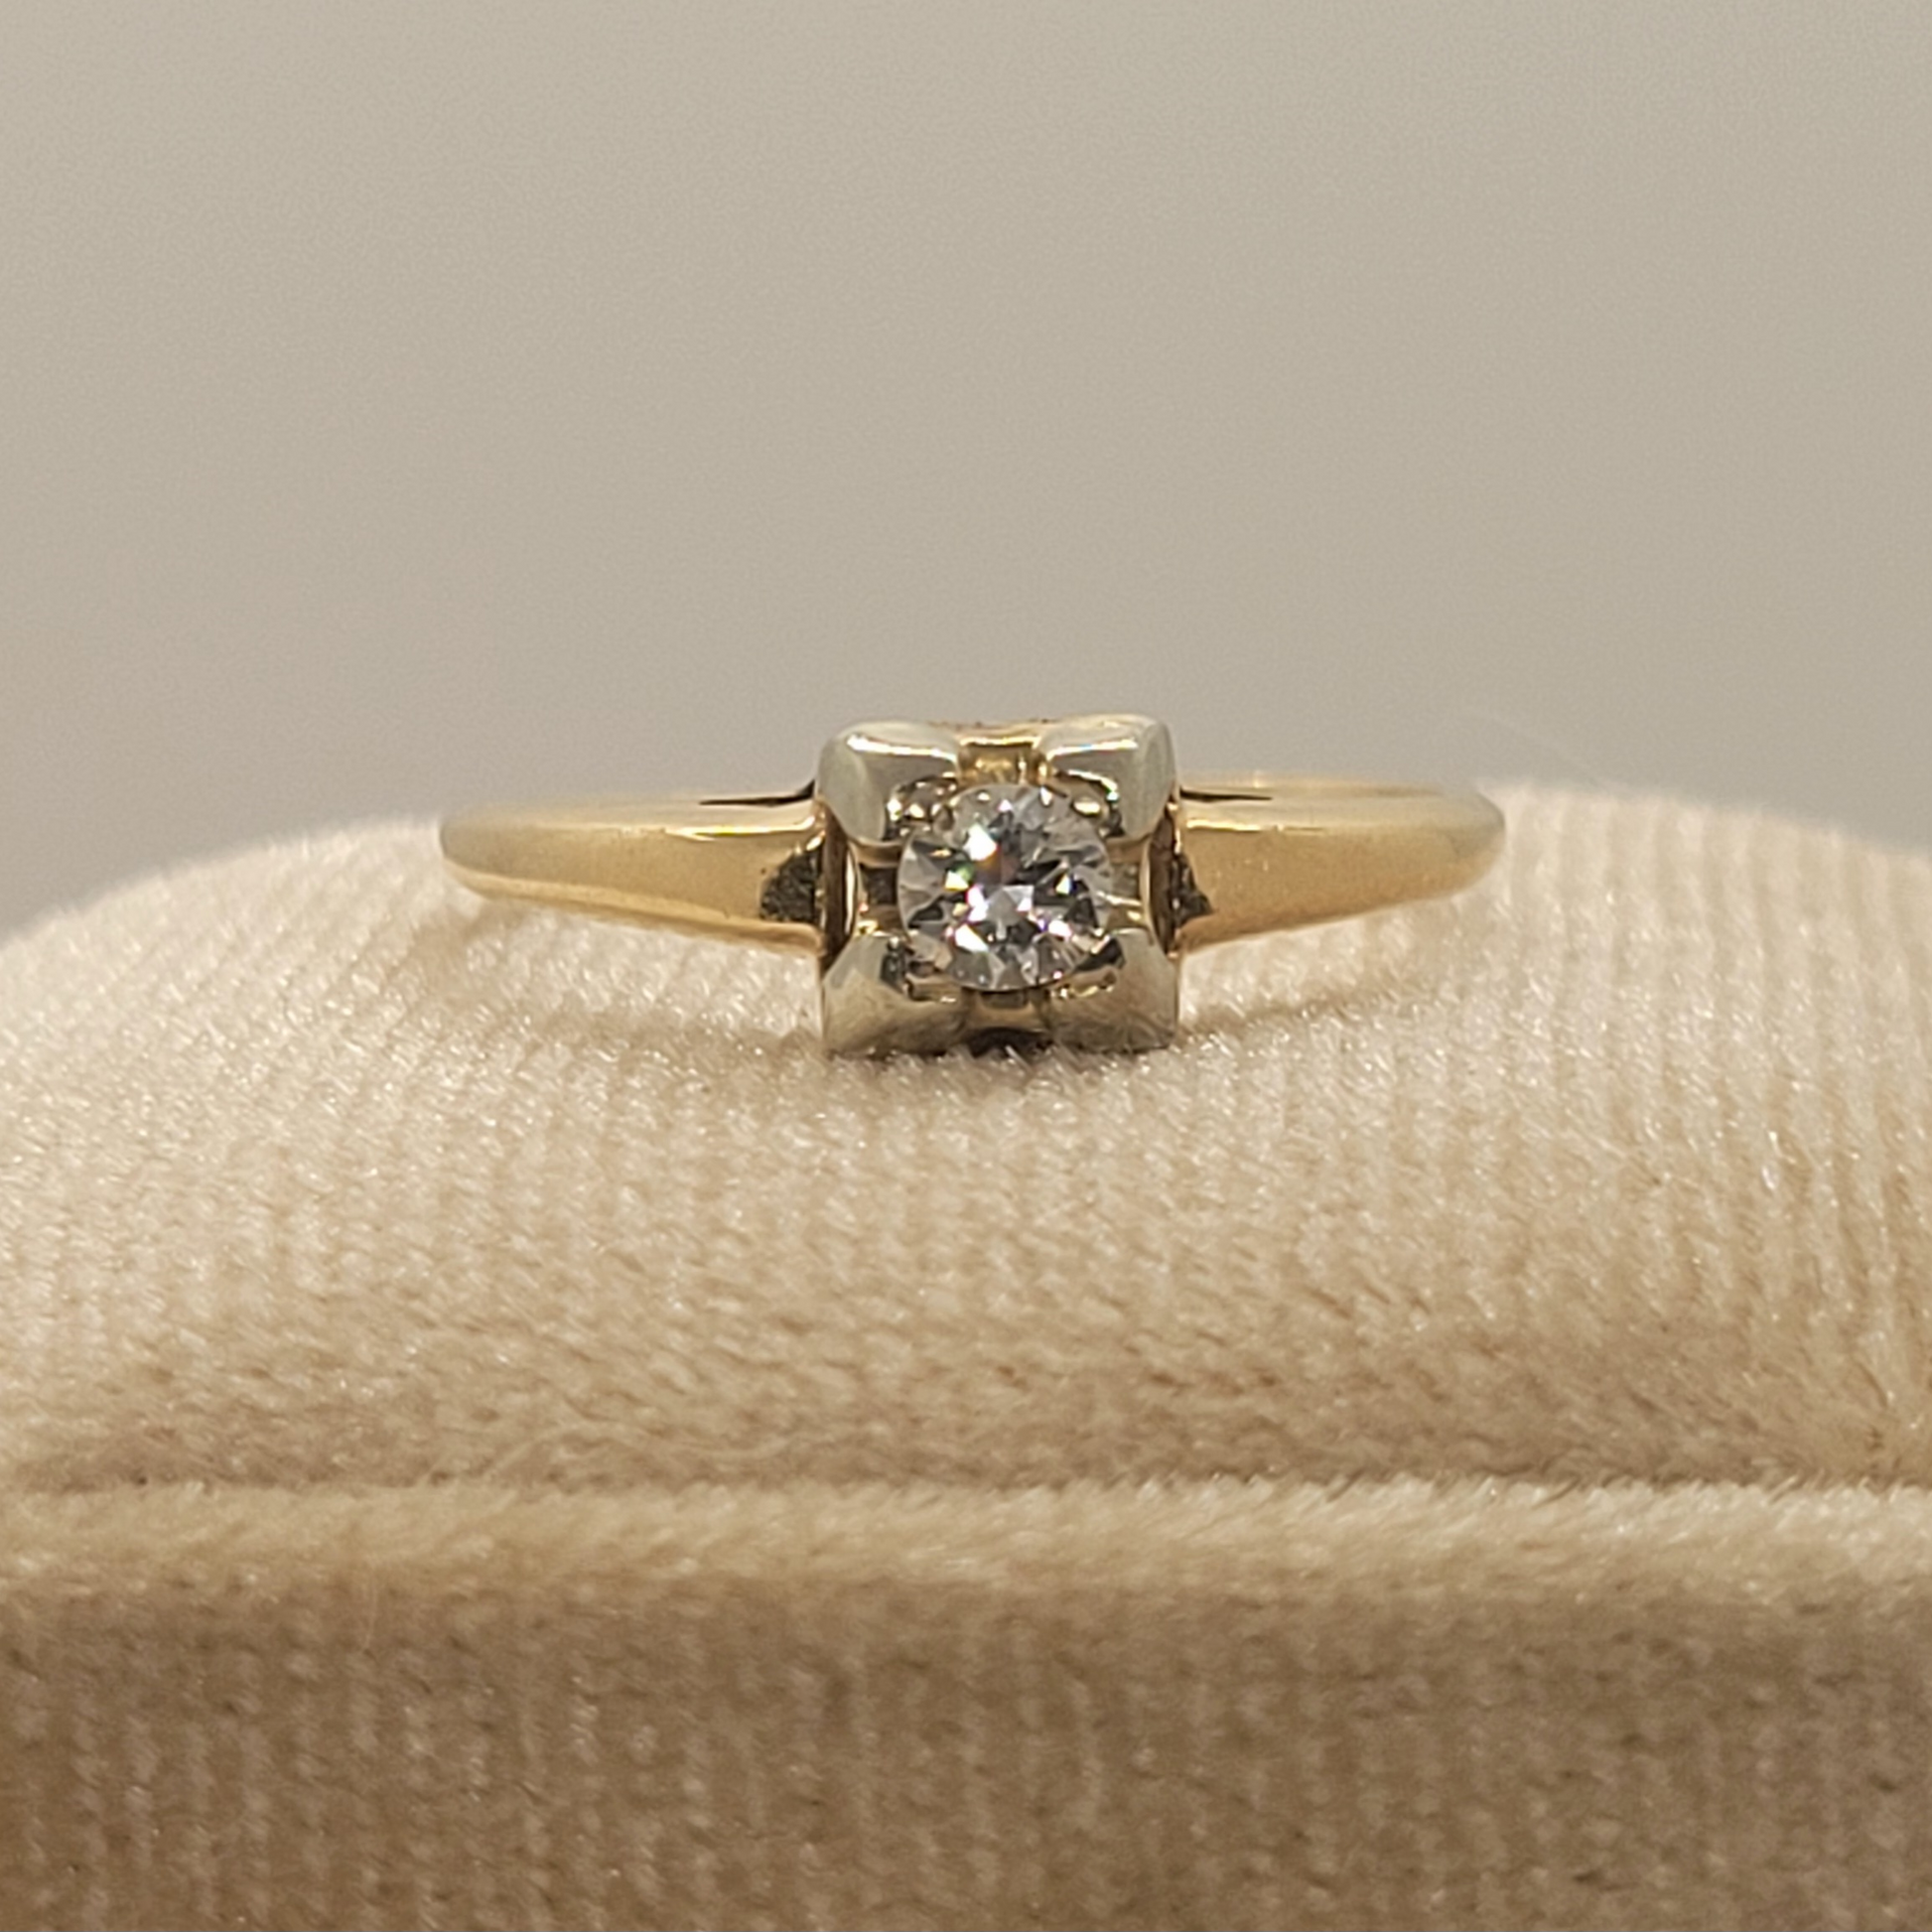 Vintage Diamond Solitaire 14K Yellow Gold Engagement Ring